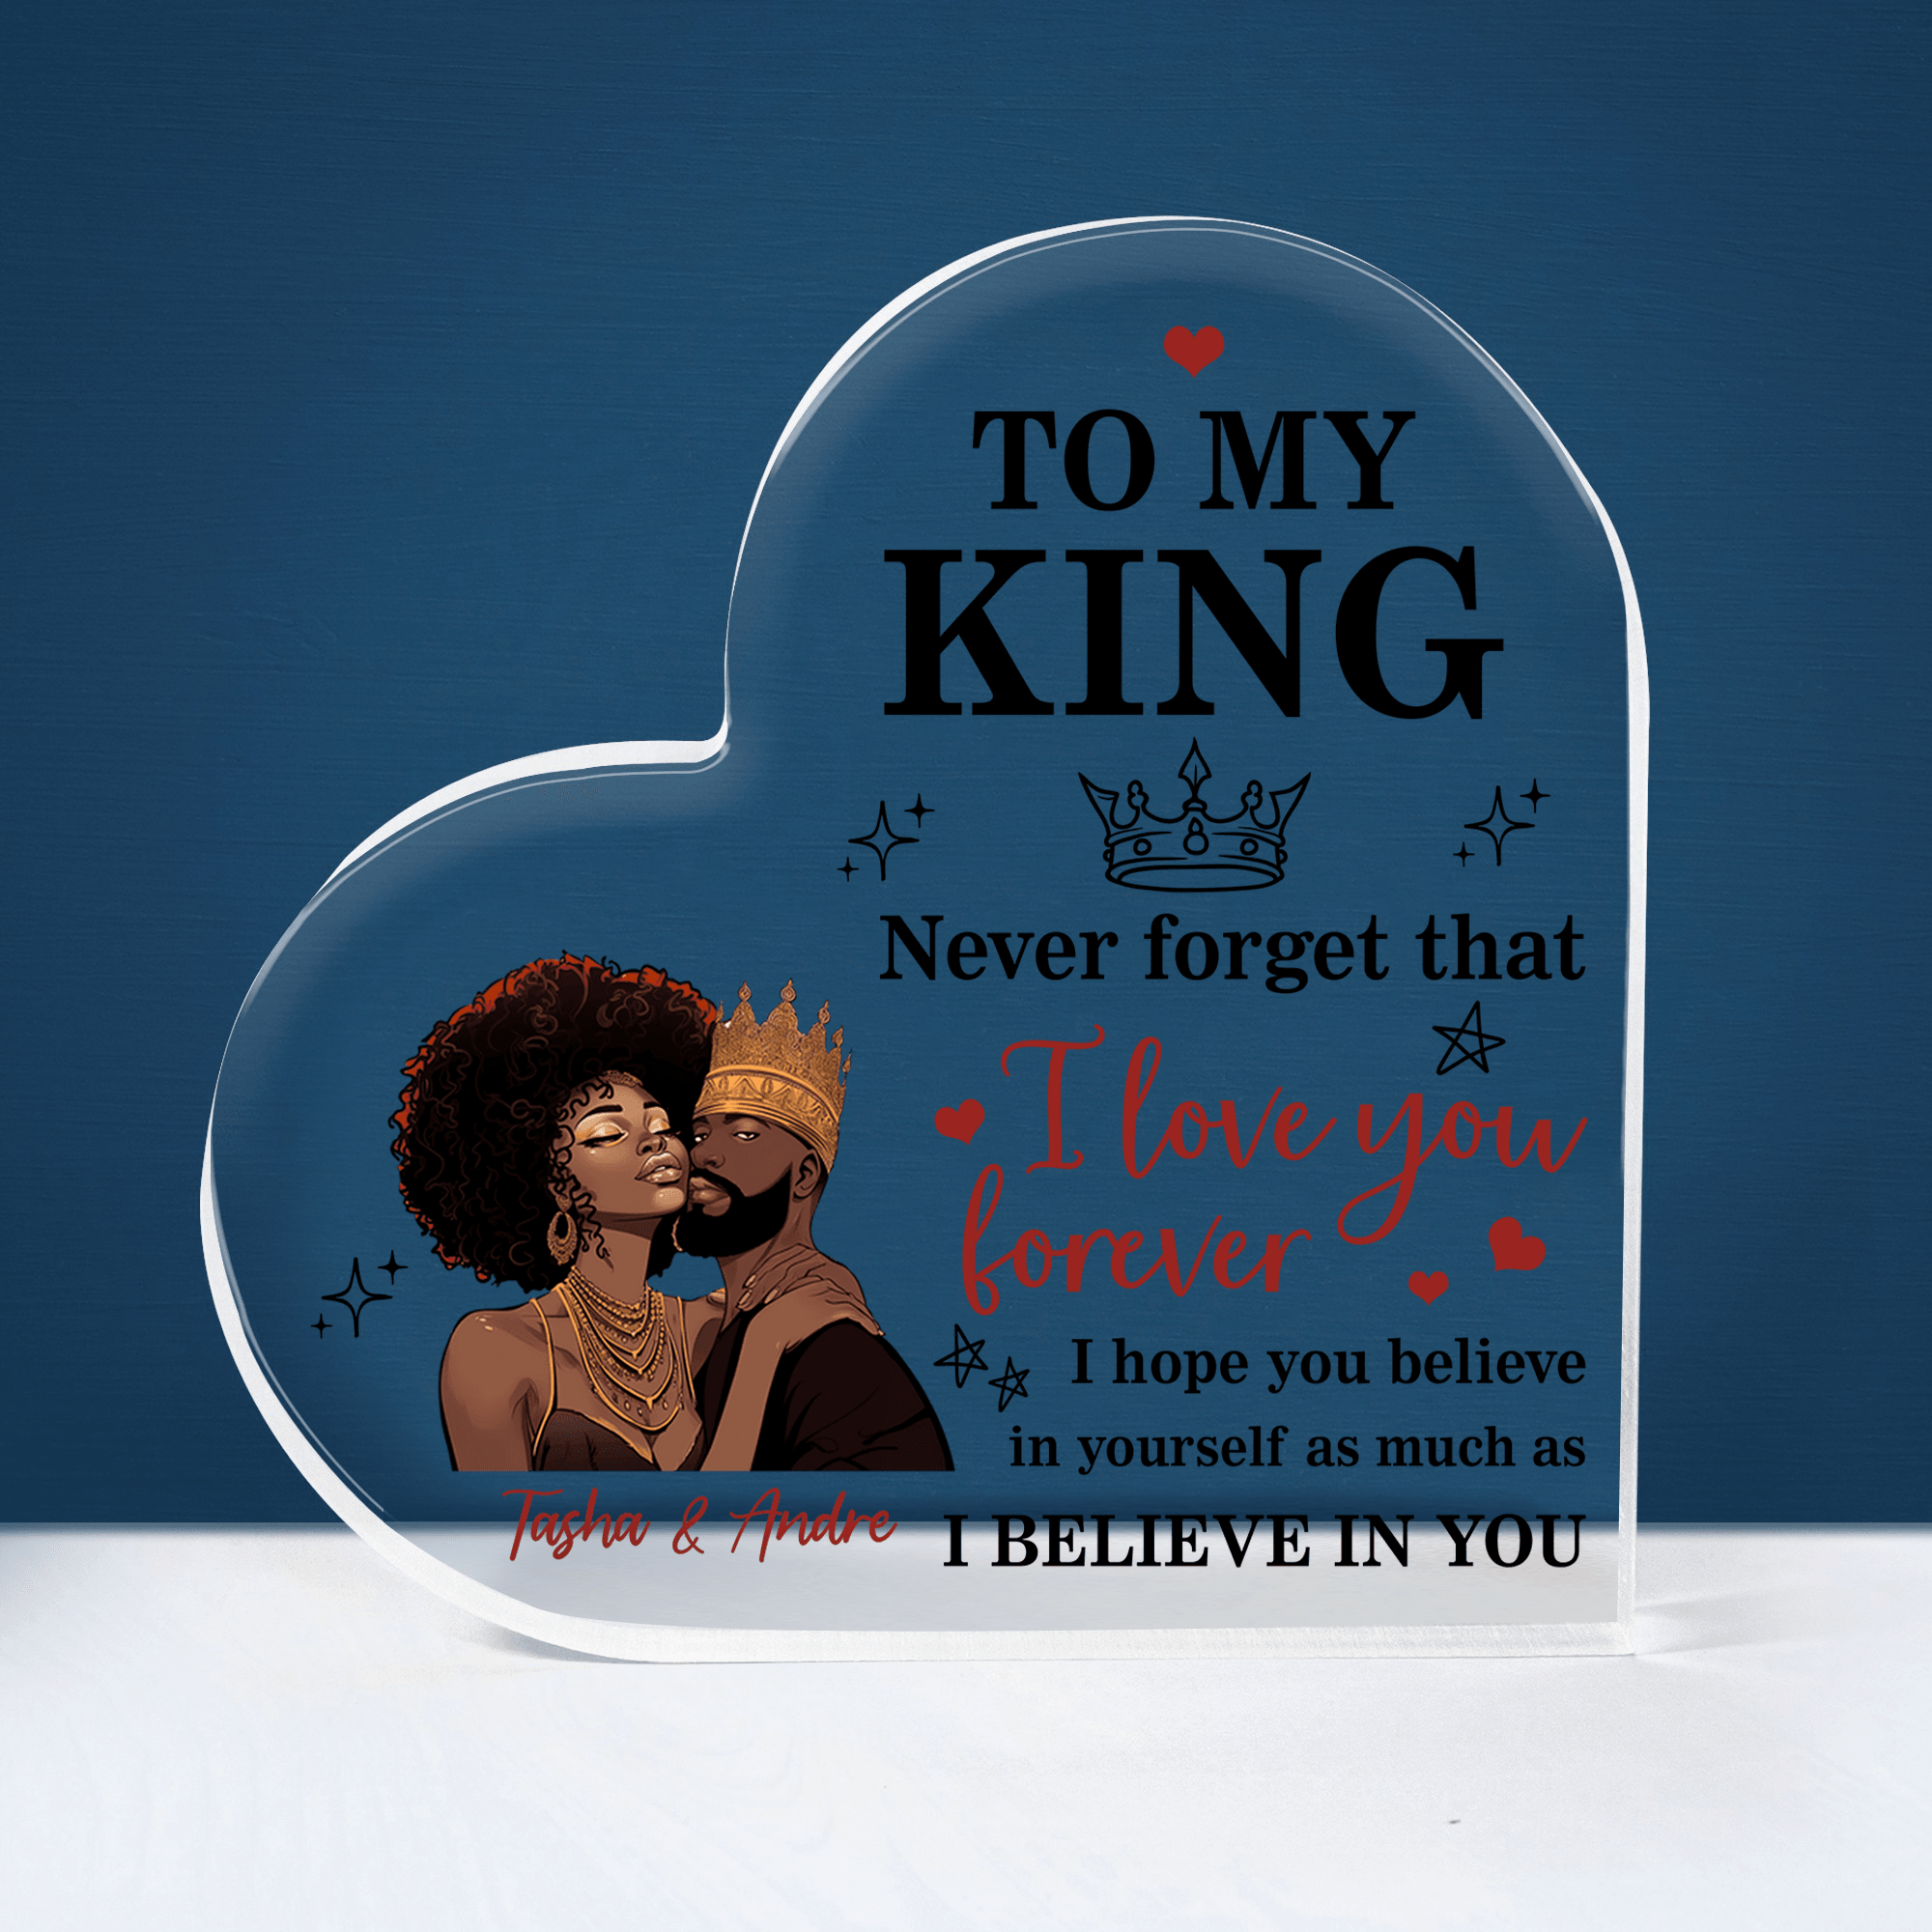 Custom Photo To My King, To My Queen Never Forget That - Personalized Custom Heart-shaped Acrylic Plaque - Valentine's Day, Anniversary Gift for Melanin, Afro, Black African American Couple, Husband, Wife, Girlfriend, Boyfriend, Her/Him, Family